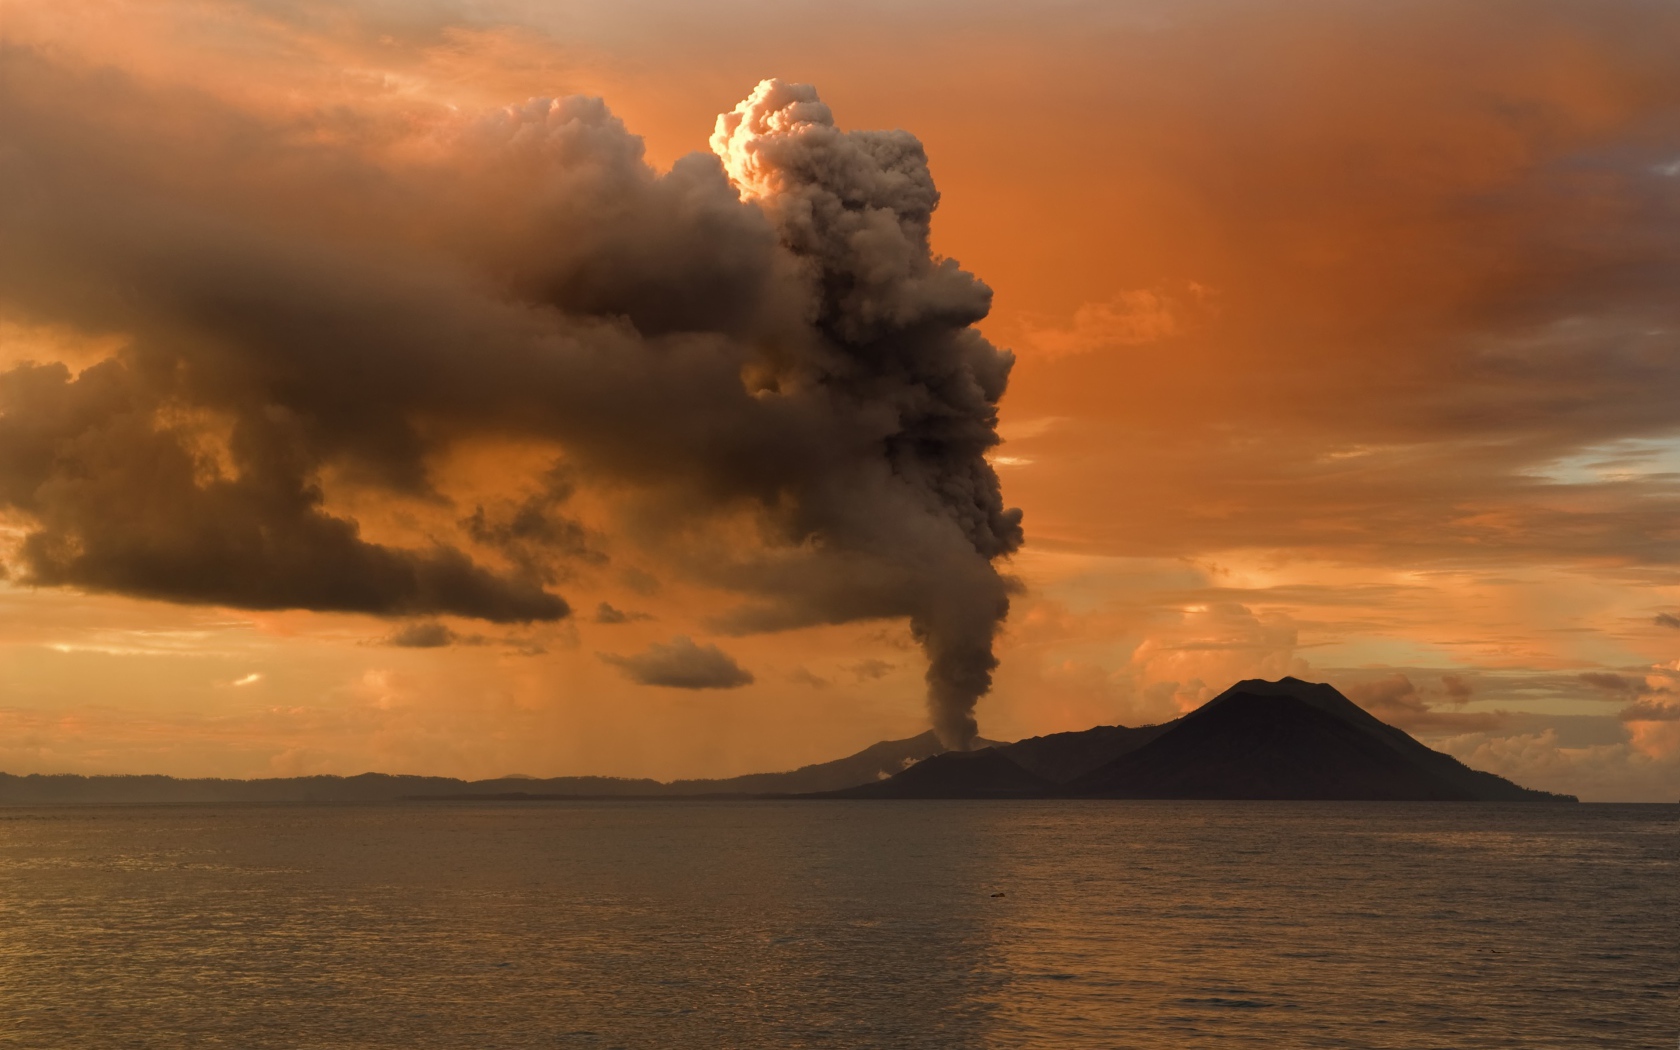 The eruption of a volcano on an island in the sea